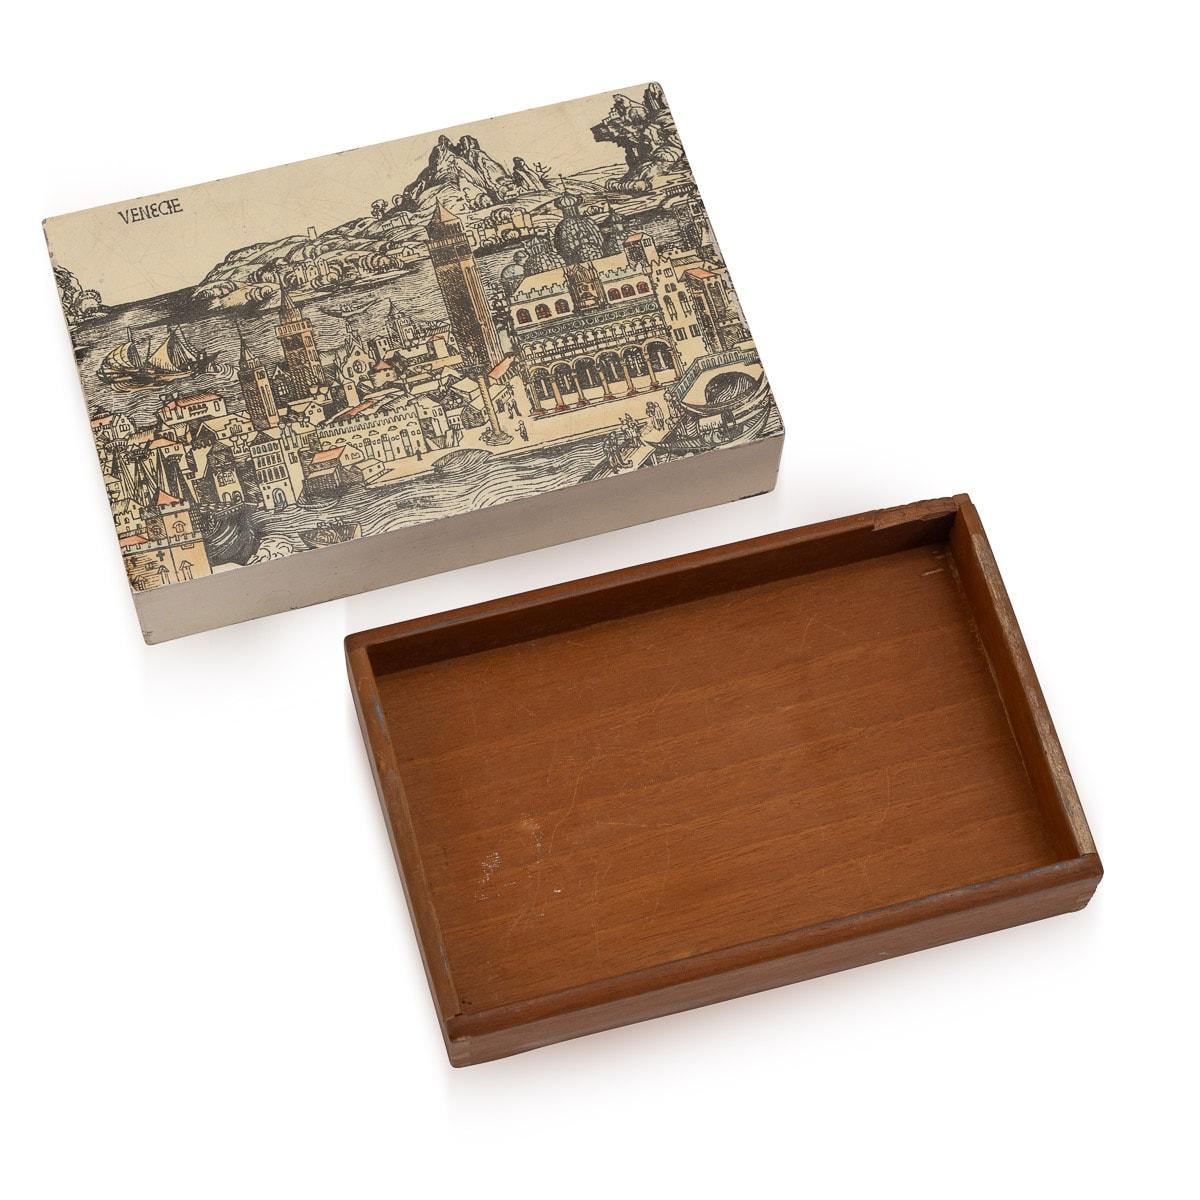 20th Century Beautiful Matchbox / Trinket Box By Piero Fornasetti, Italy, c.1960/70's For Sale